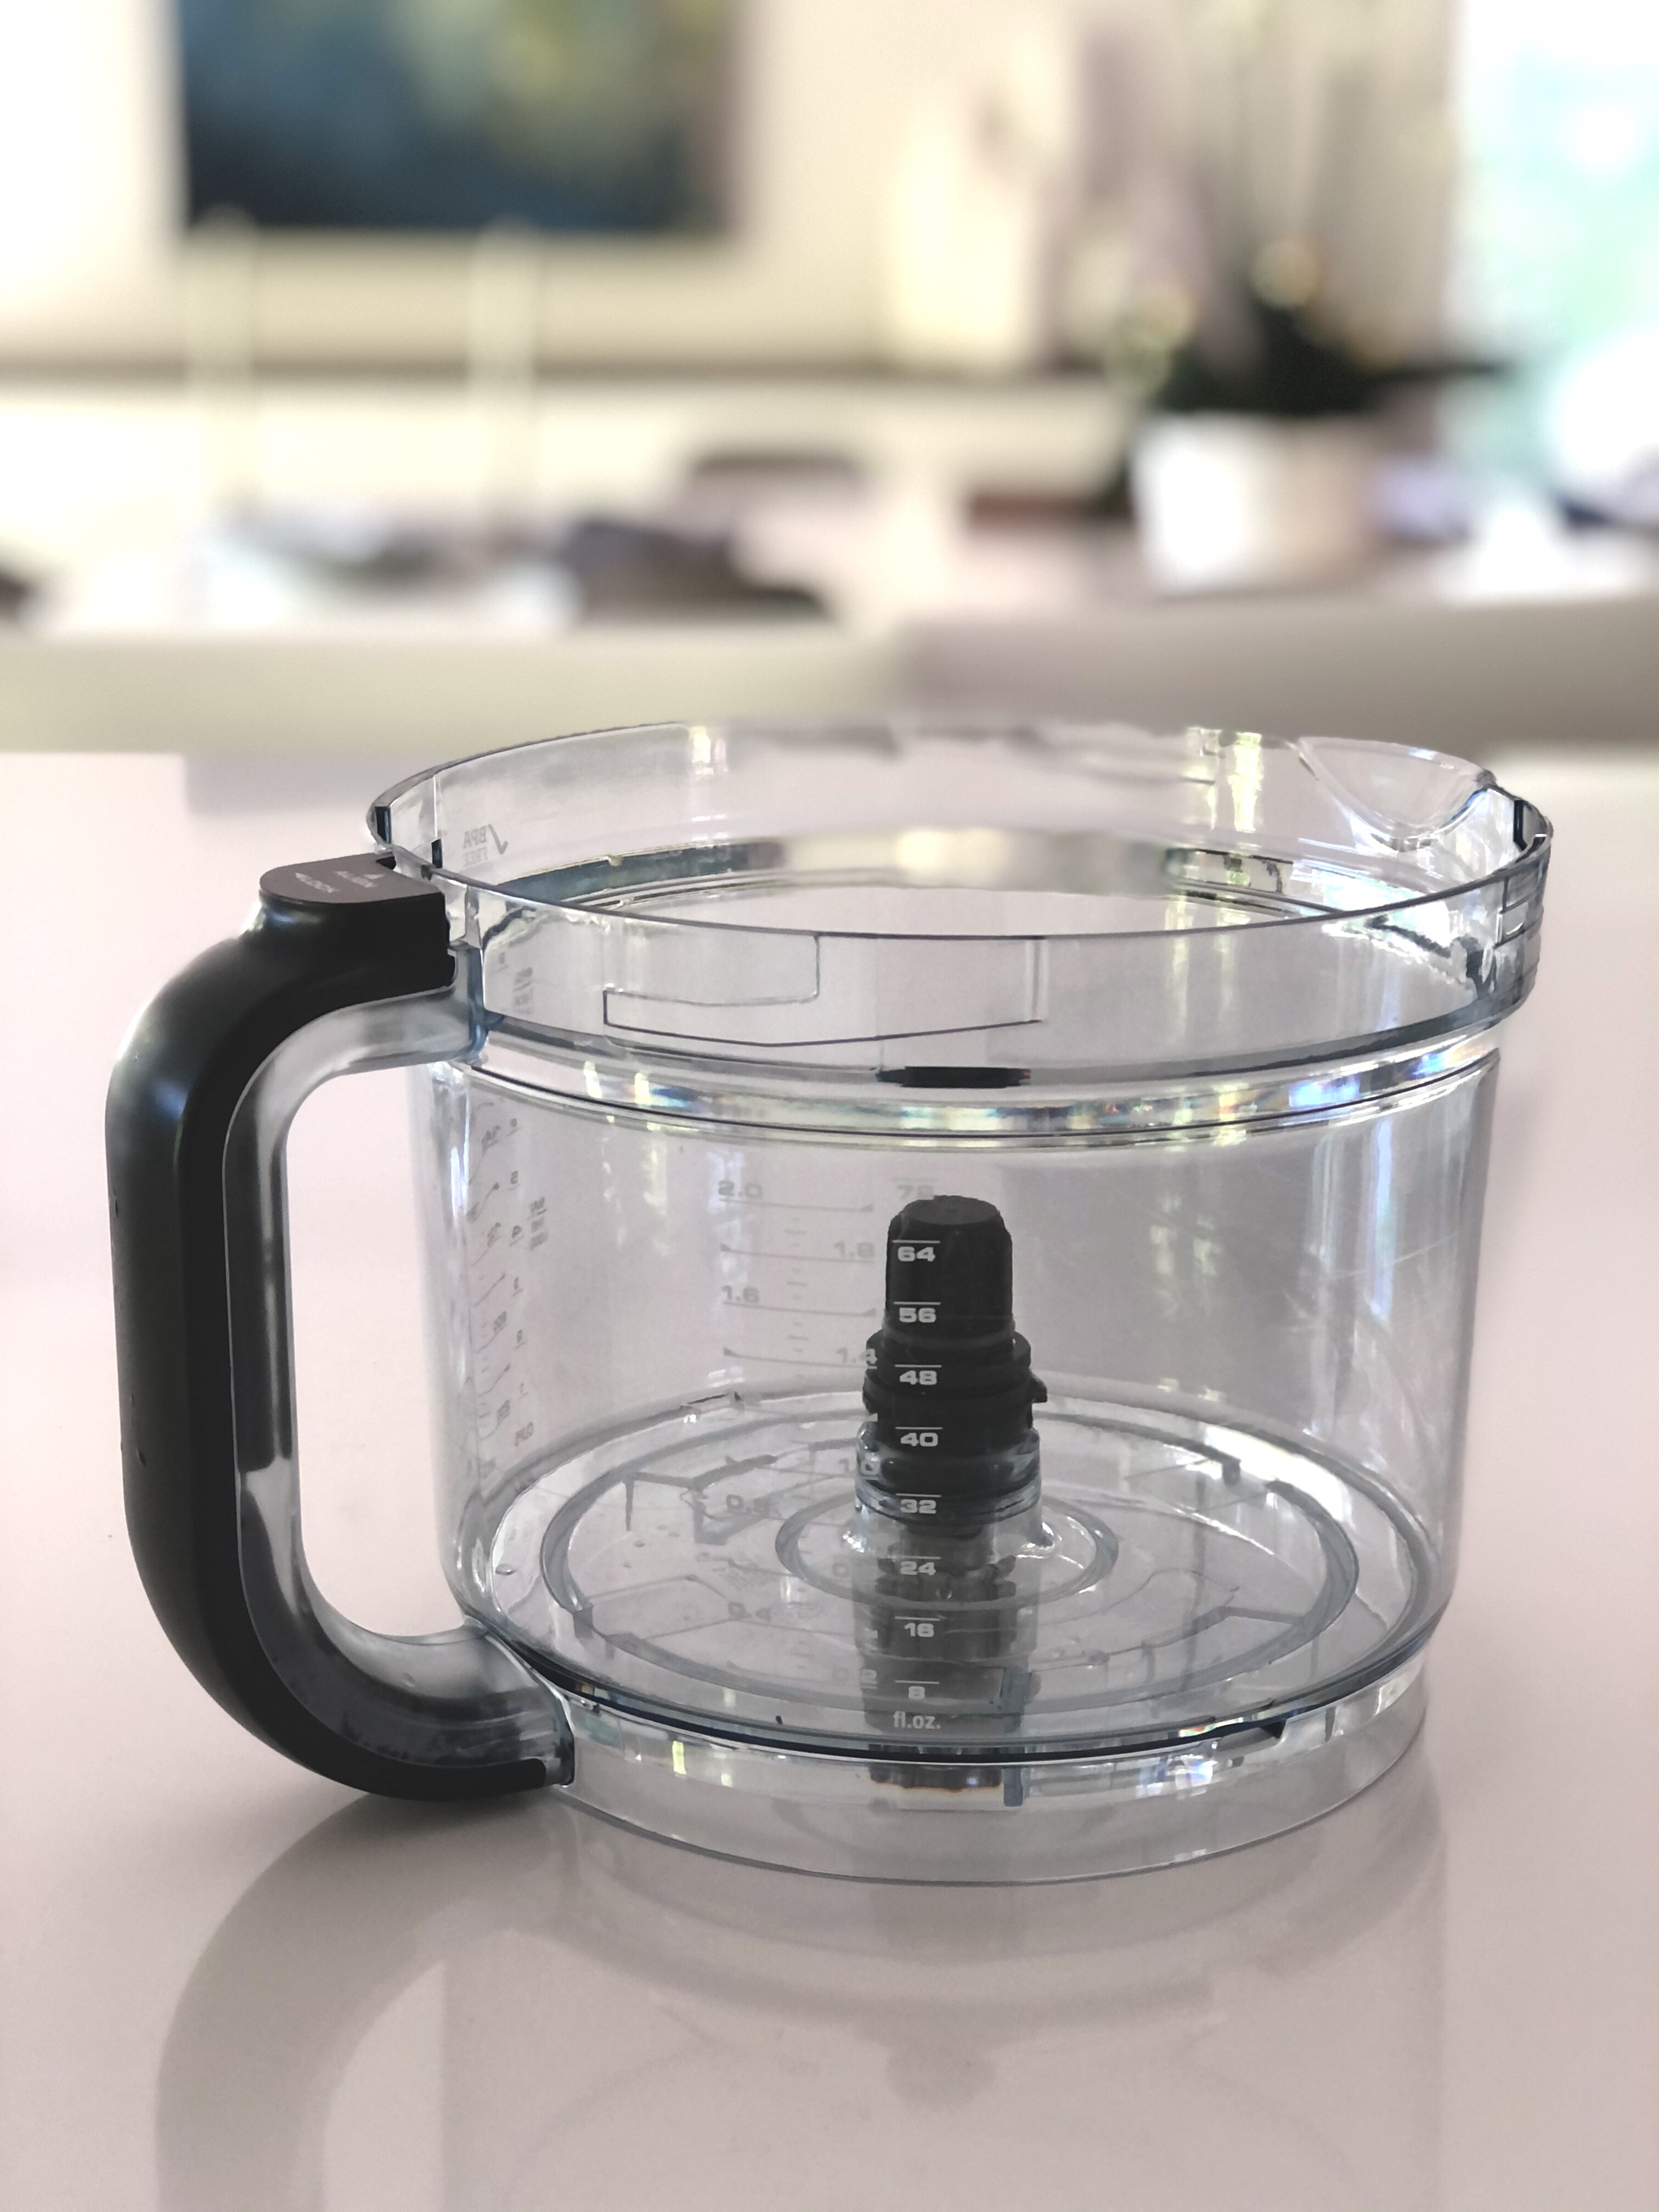 Breville Sous Chef 12 Food Processor Review | paleogirl99